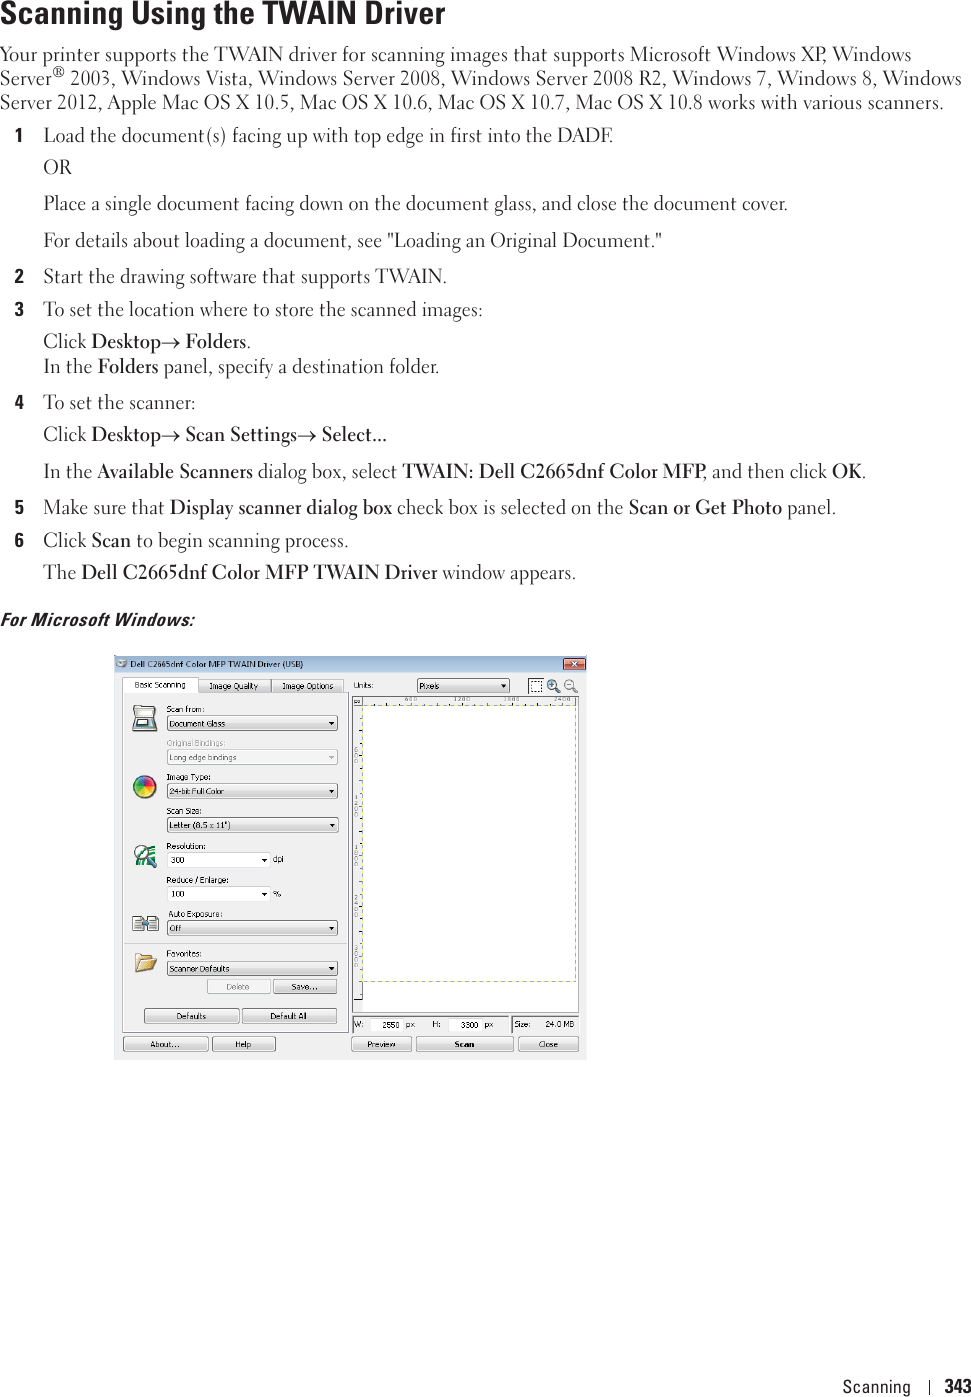 Scanning 343Scanning Using the TWAIN DriverYour printer supports the TWAIN driver for scanning images that supports Microsoft Windows XP, Windows Server® 2003, Windows Vista, Windows Server 2008, Windows Server 2008 R2, Windows 7, Windows 8, Windows Server 2012, Apple Mac OS X 10.5, Mac OS X 10.6, Mac OS X 10.7, Mac OS X 10.8 works with various scanners.1Load the document(s) facing up with top edge in first into the DADF.ORPlace a single document facing down on the document glass, and close the document cover.For details about loading a document, see &quot;Loading an Original Document.&quot;2Start the drawing software that supports TWAIN.3To set the location where to store the scanned images: Click DesktopoFolders.In the Folders panel, specify a destination folder.4To set the scanner: Click DesktopoScan SettingsoSelect...In the Available Scanners dialog box, select TWAIN: Dell C2665dnf Color MFP, and then click OK.5Make sure that Display scanner dialog box check box is selected on the Scan or Get Photo panel.6Click Scan to begin scanning process.The Dell C2665dnf Color MFP TWAIN Driver window appears.For Microsoft Windows: